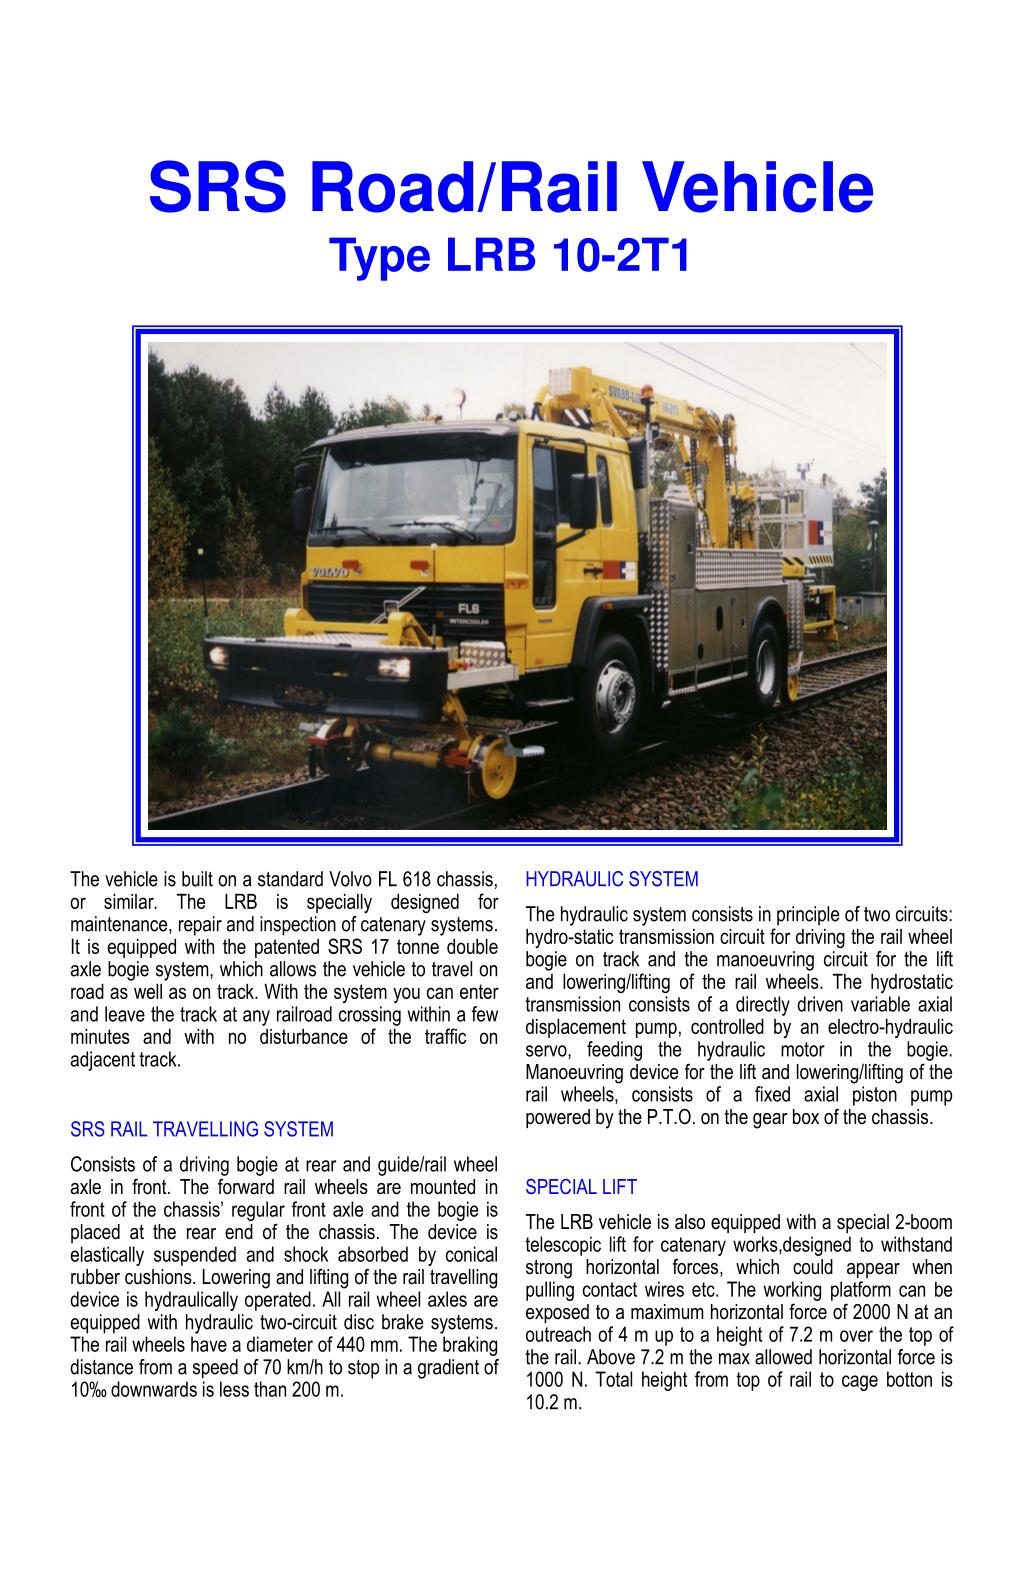 PPT - SRS Road/Rail Vehicle Type LRB 10-2T1 PowerPoint ...